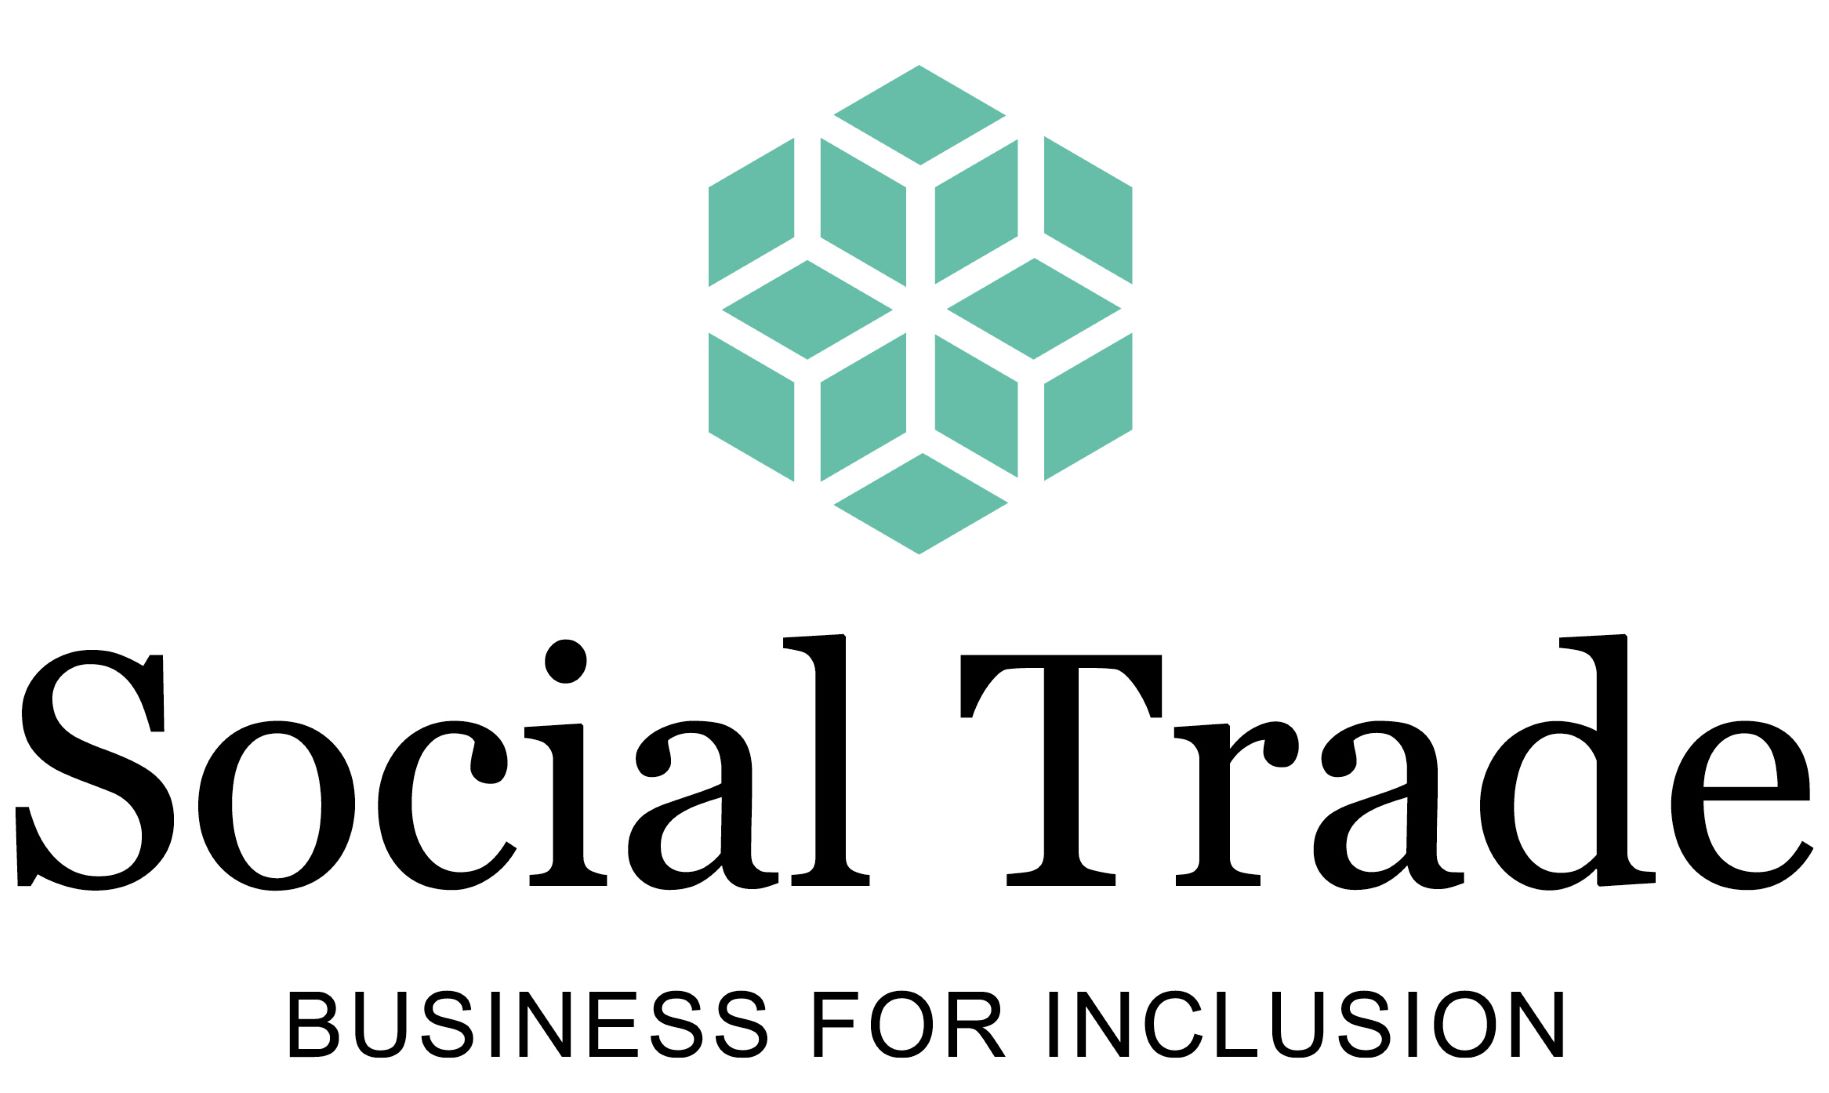 Social Trade BUSINESS FOR INCLUSION